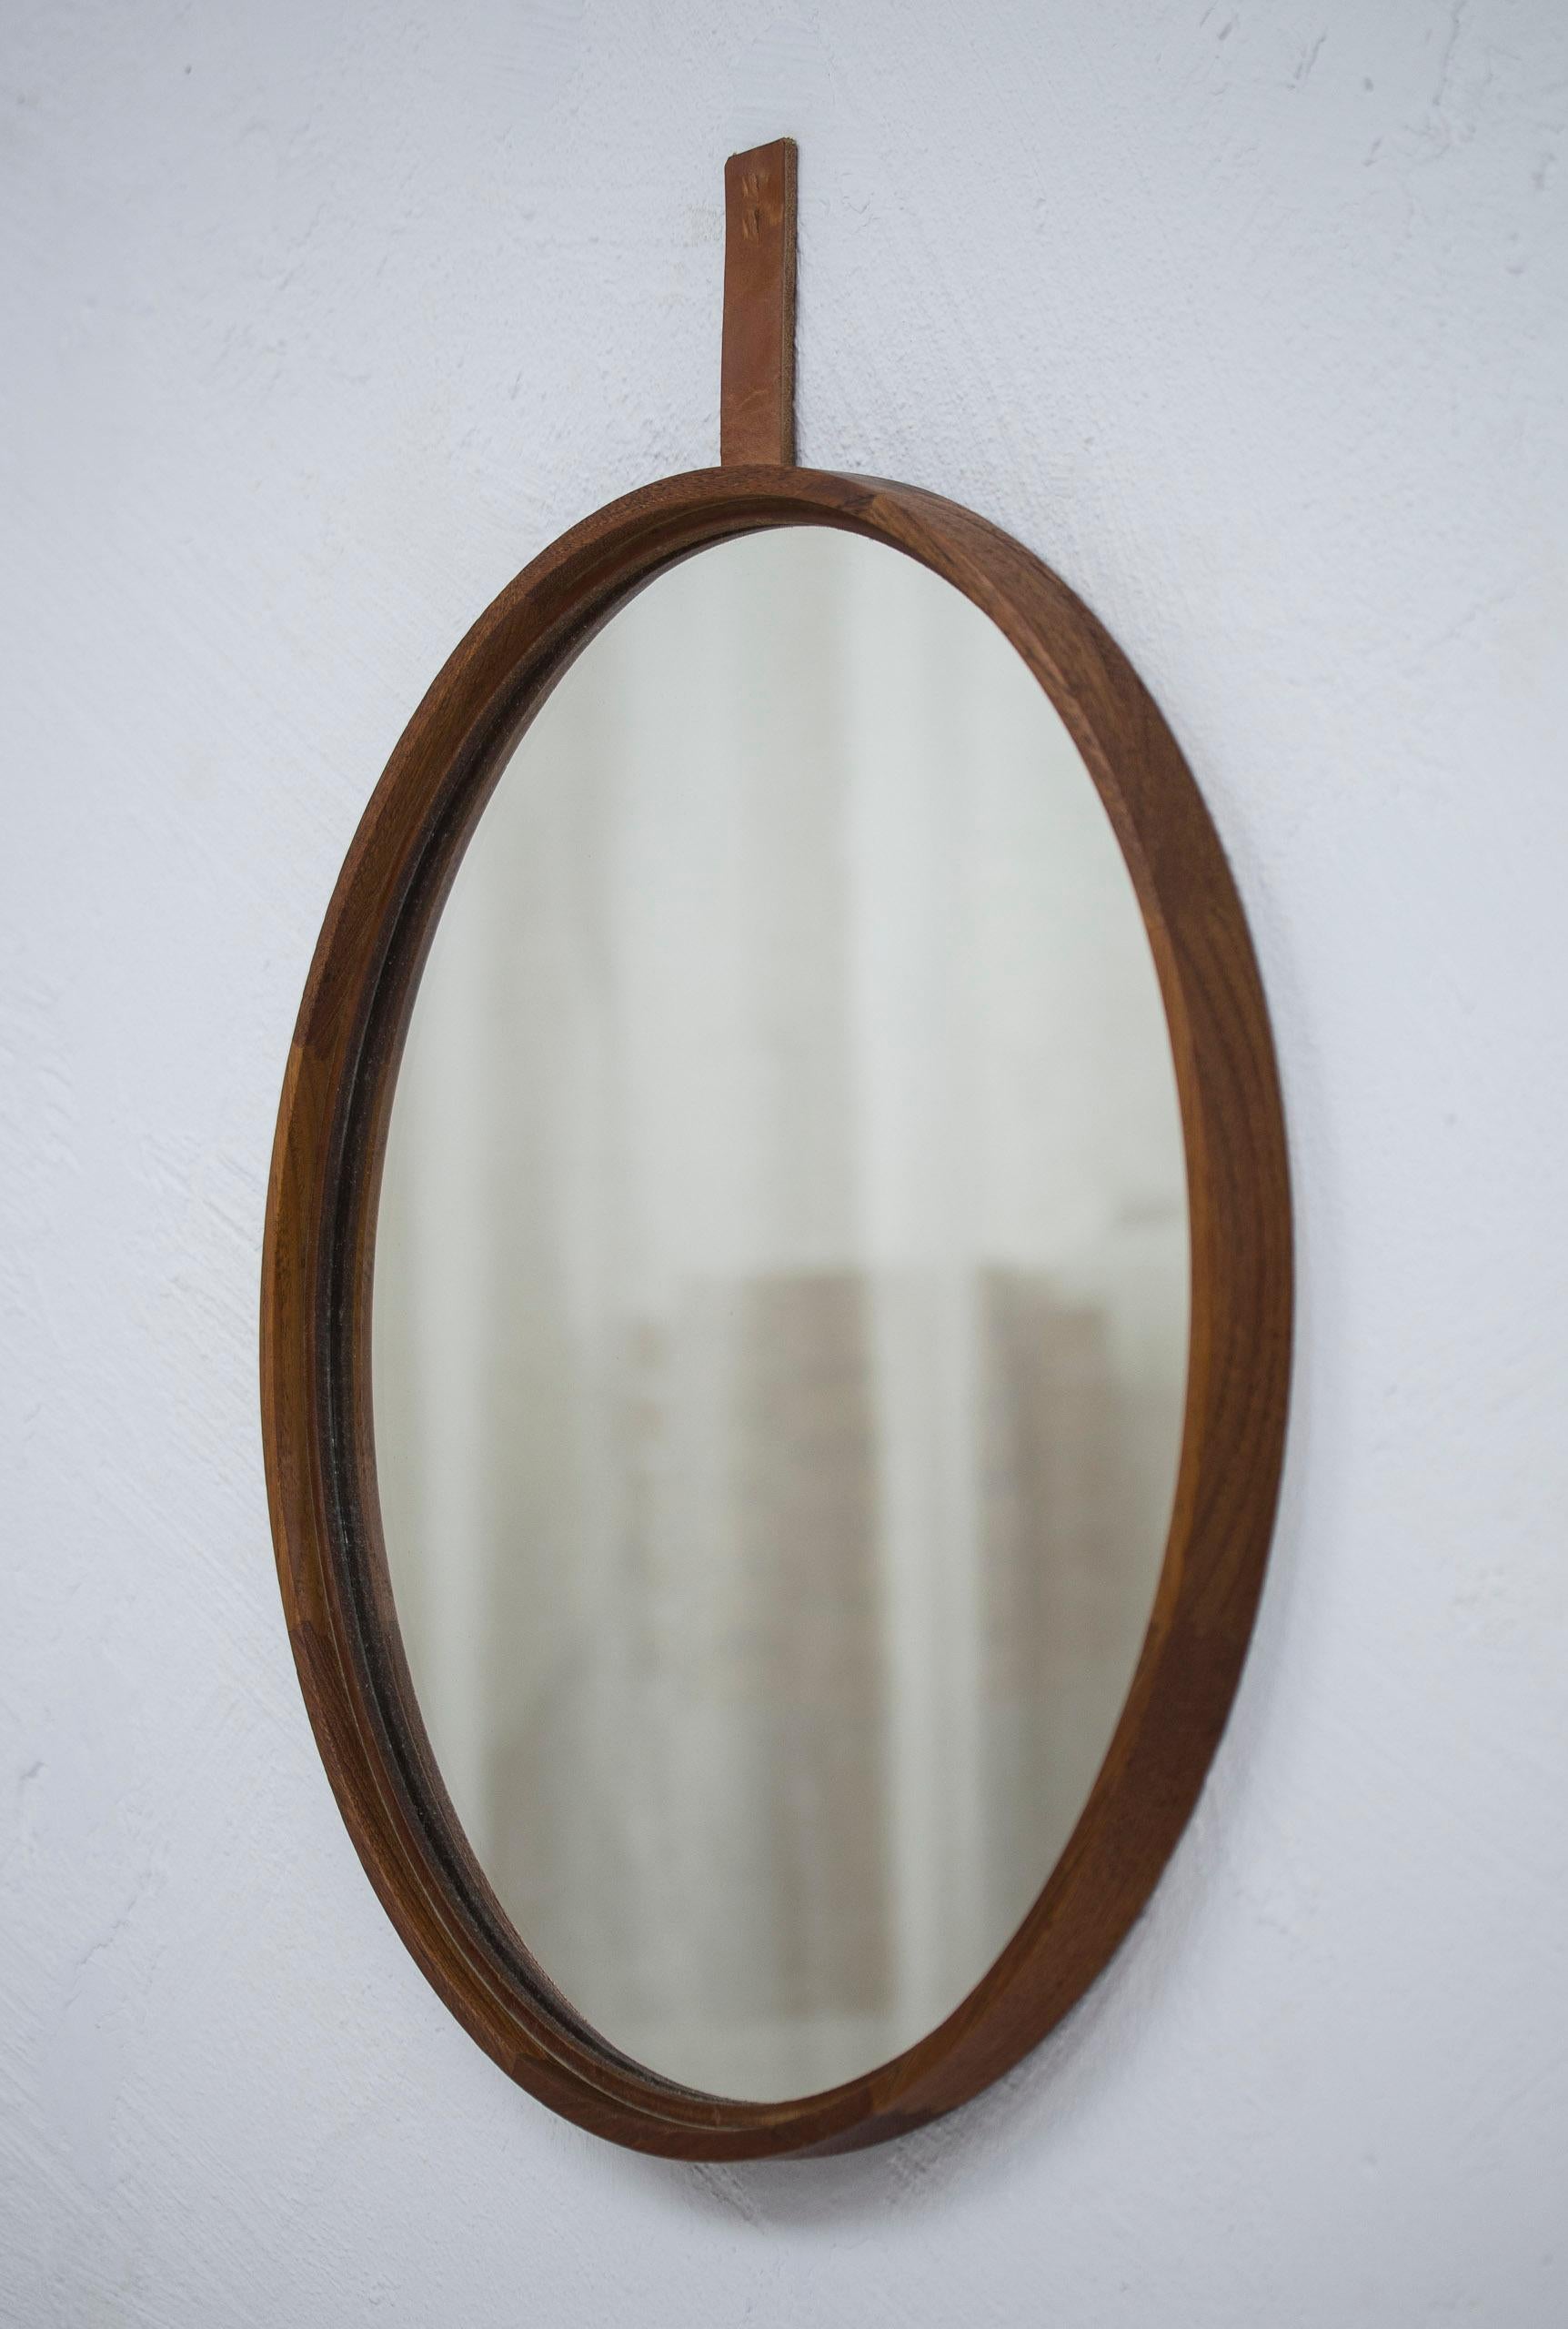 Mid-20th Century Round teak and leather wall mirror by Uno & Östen Kristiansson. For Sale